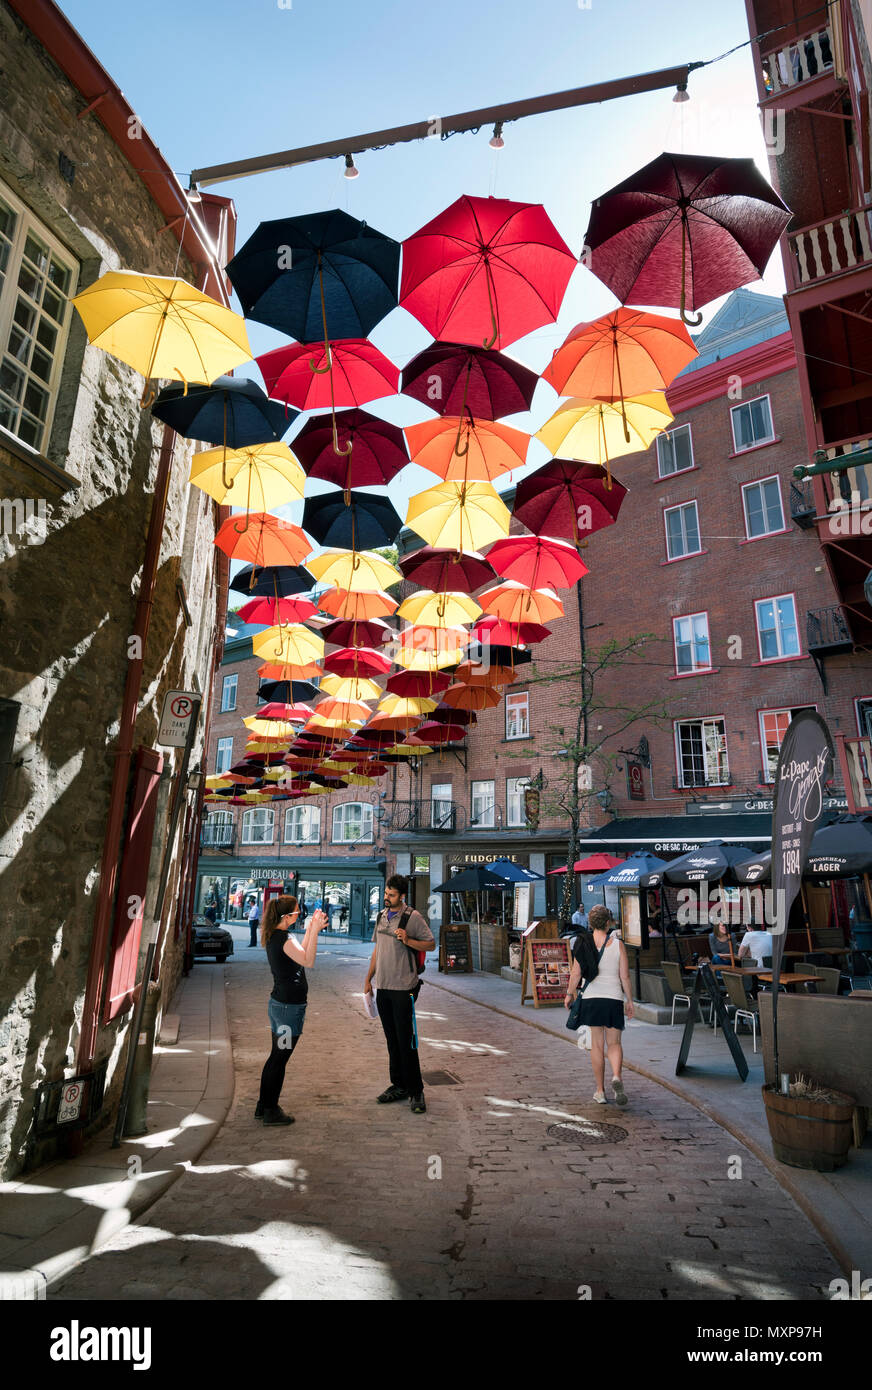 Street with umbrellas, The Old Lower Town, Quebec City, Canada Stock Photo